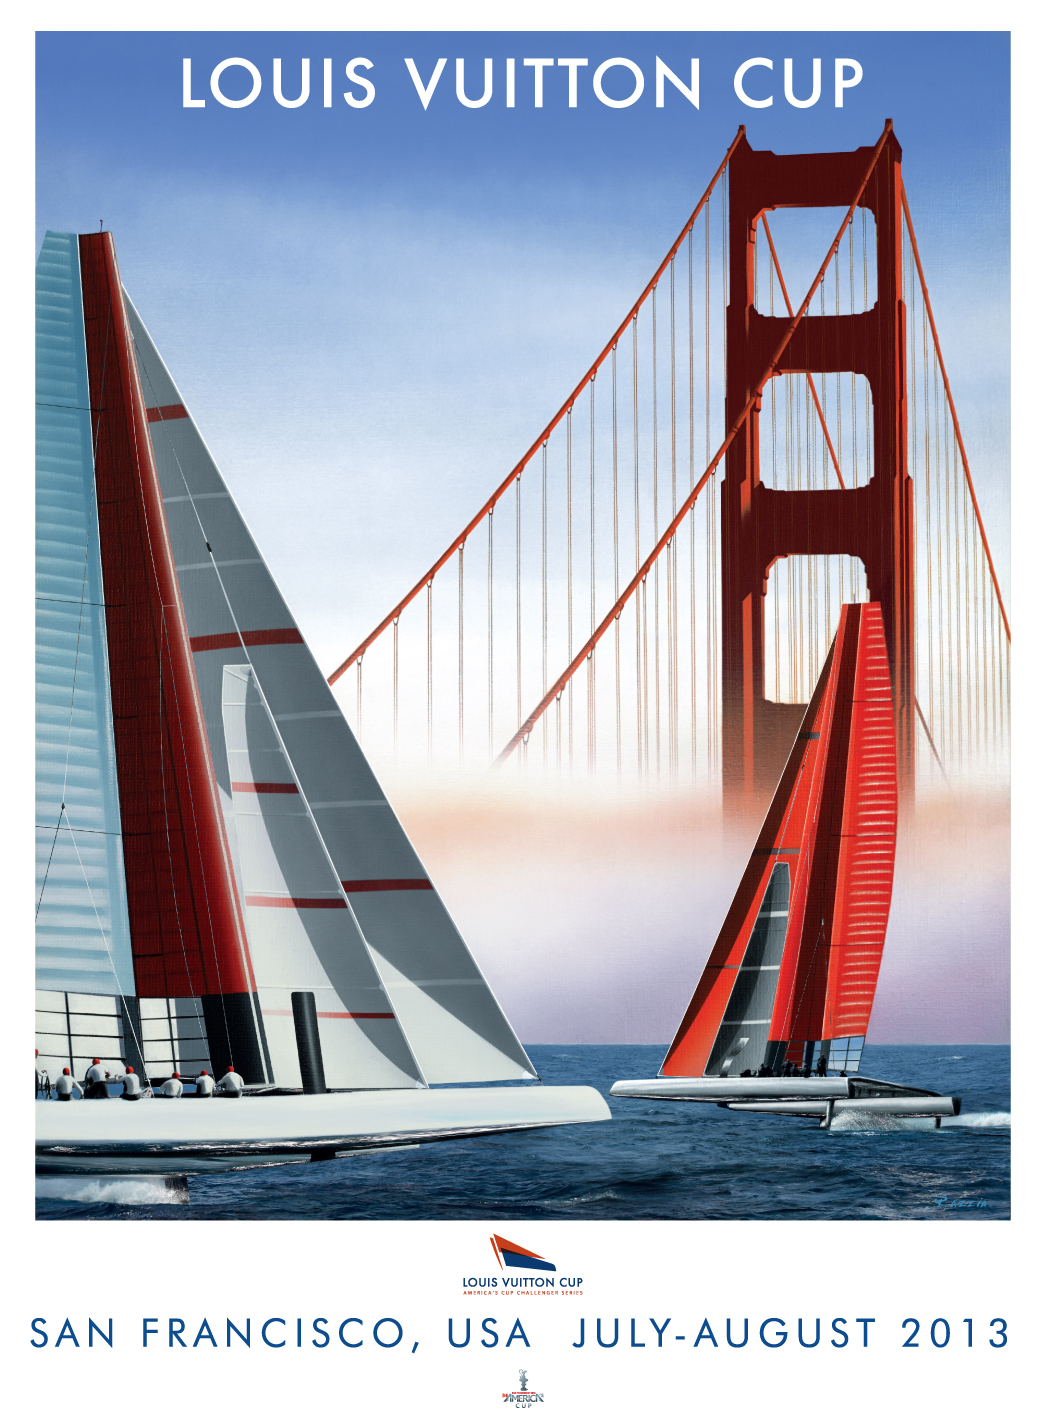 Louis Vuitton Cup Challenger races for America's cup poster by